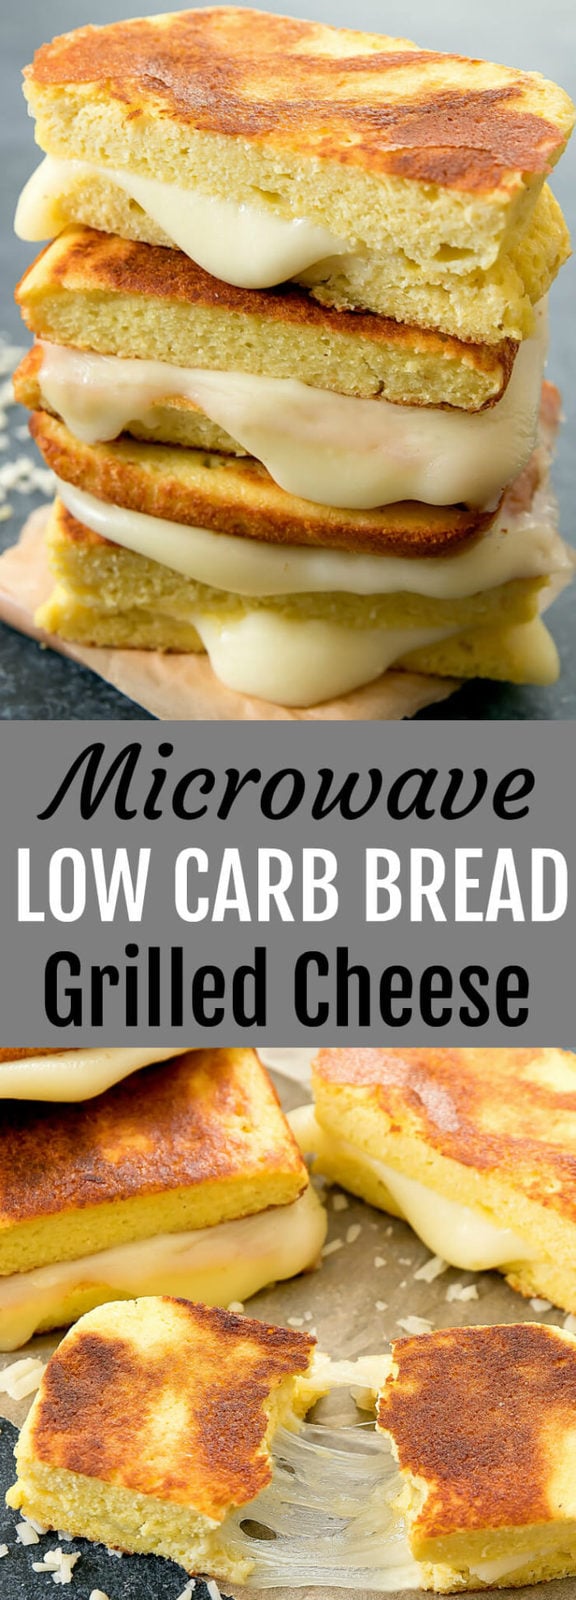 Microwave Low Carb Bread Grilled Cheese